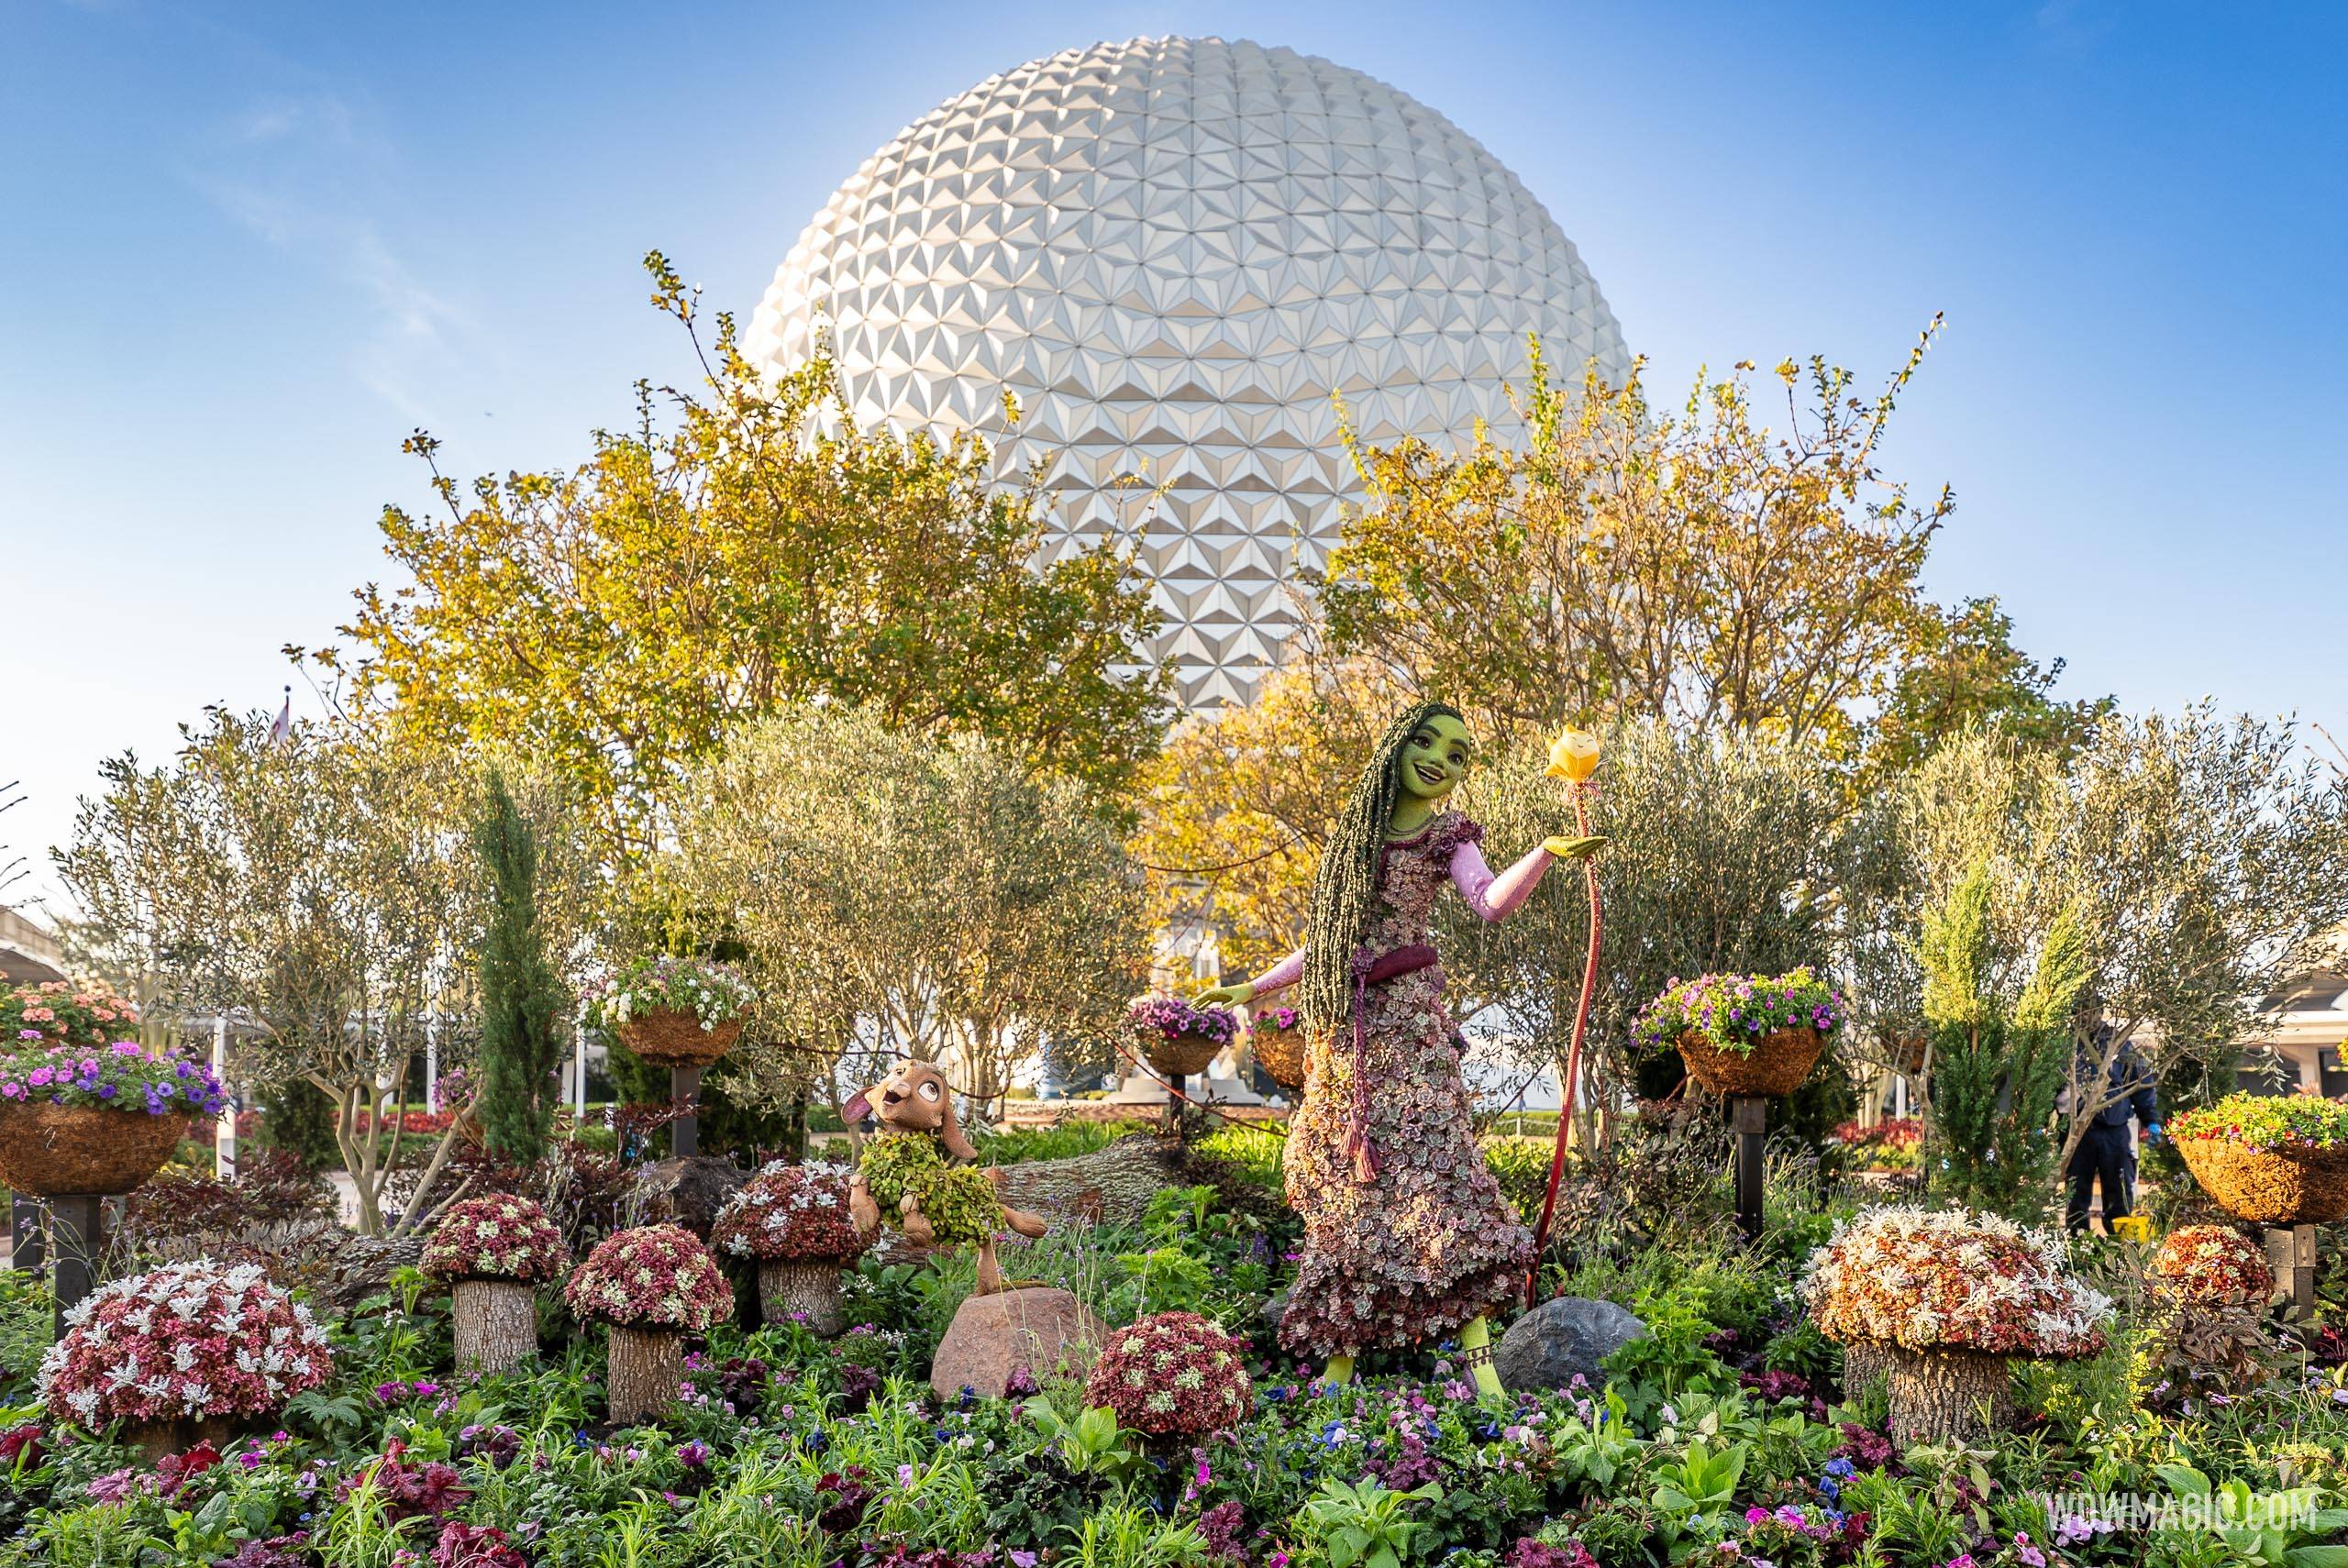 Characters from 'Wish' headline the 2024 EPCOT International Flower and Garden Festival in new main entrance display